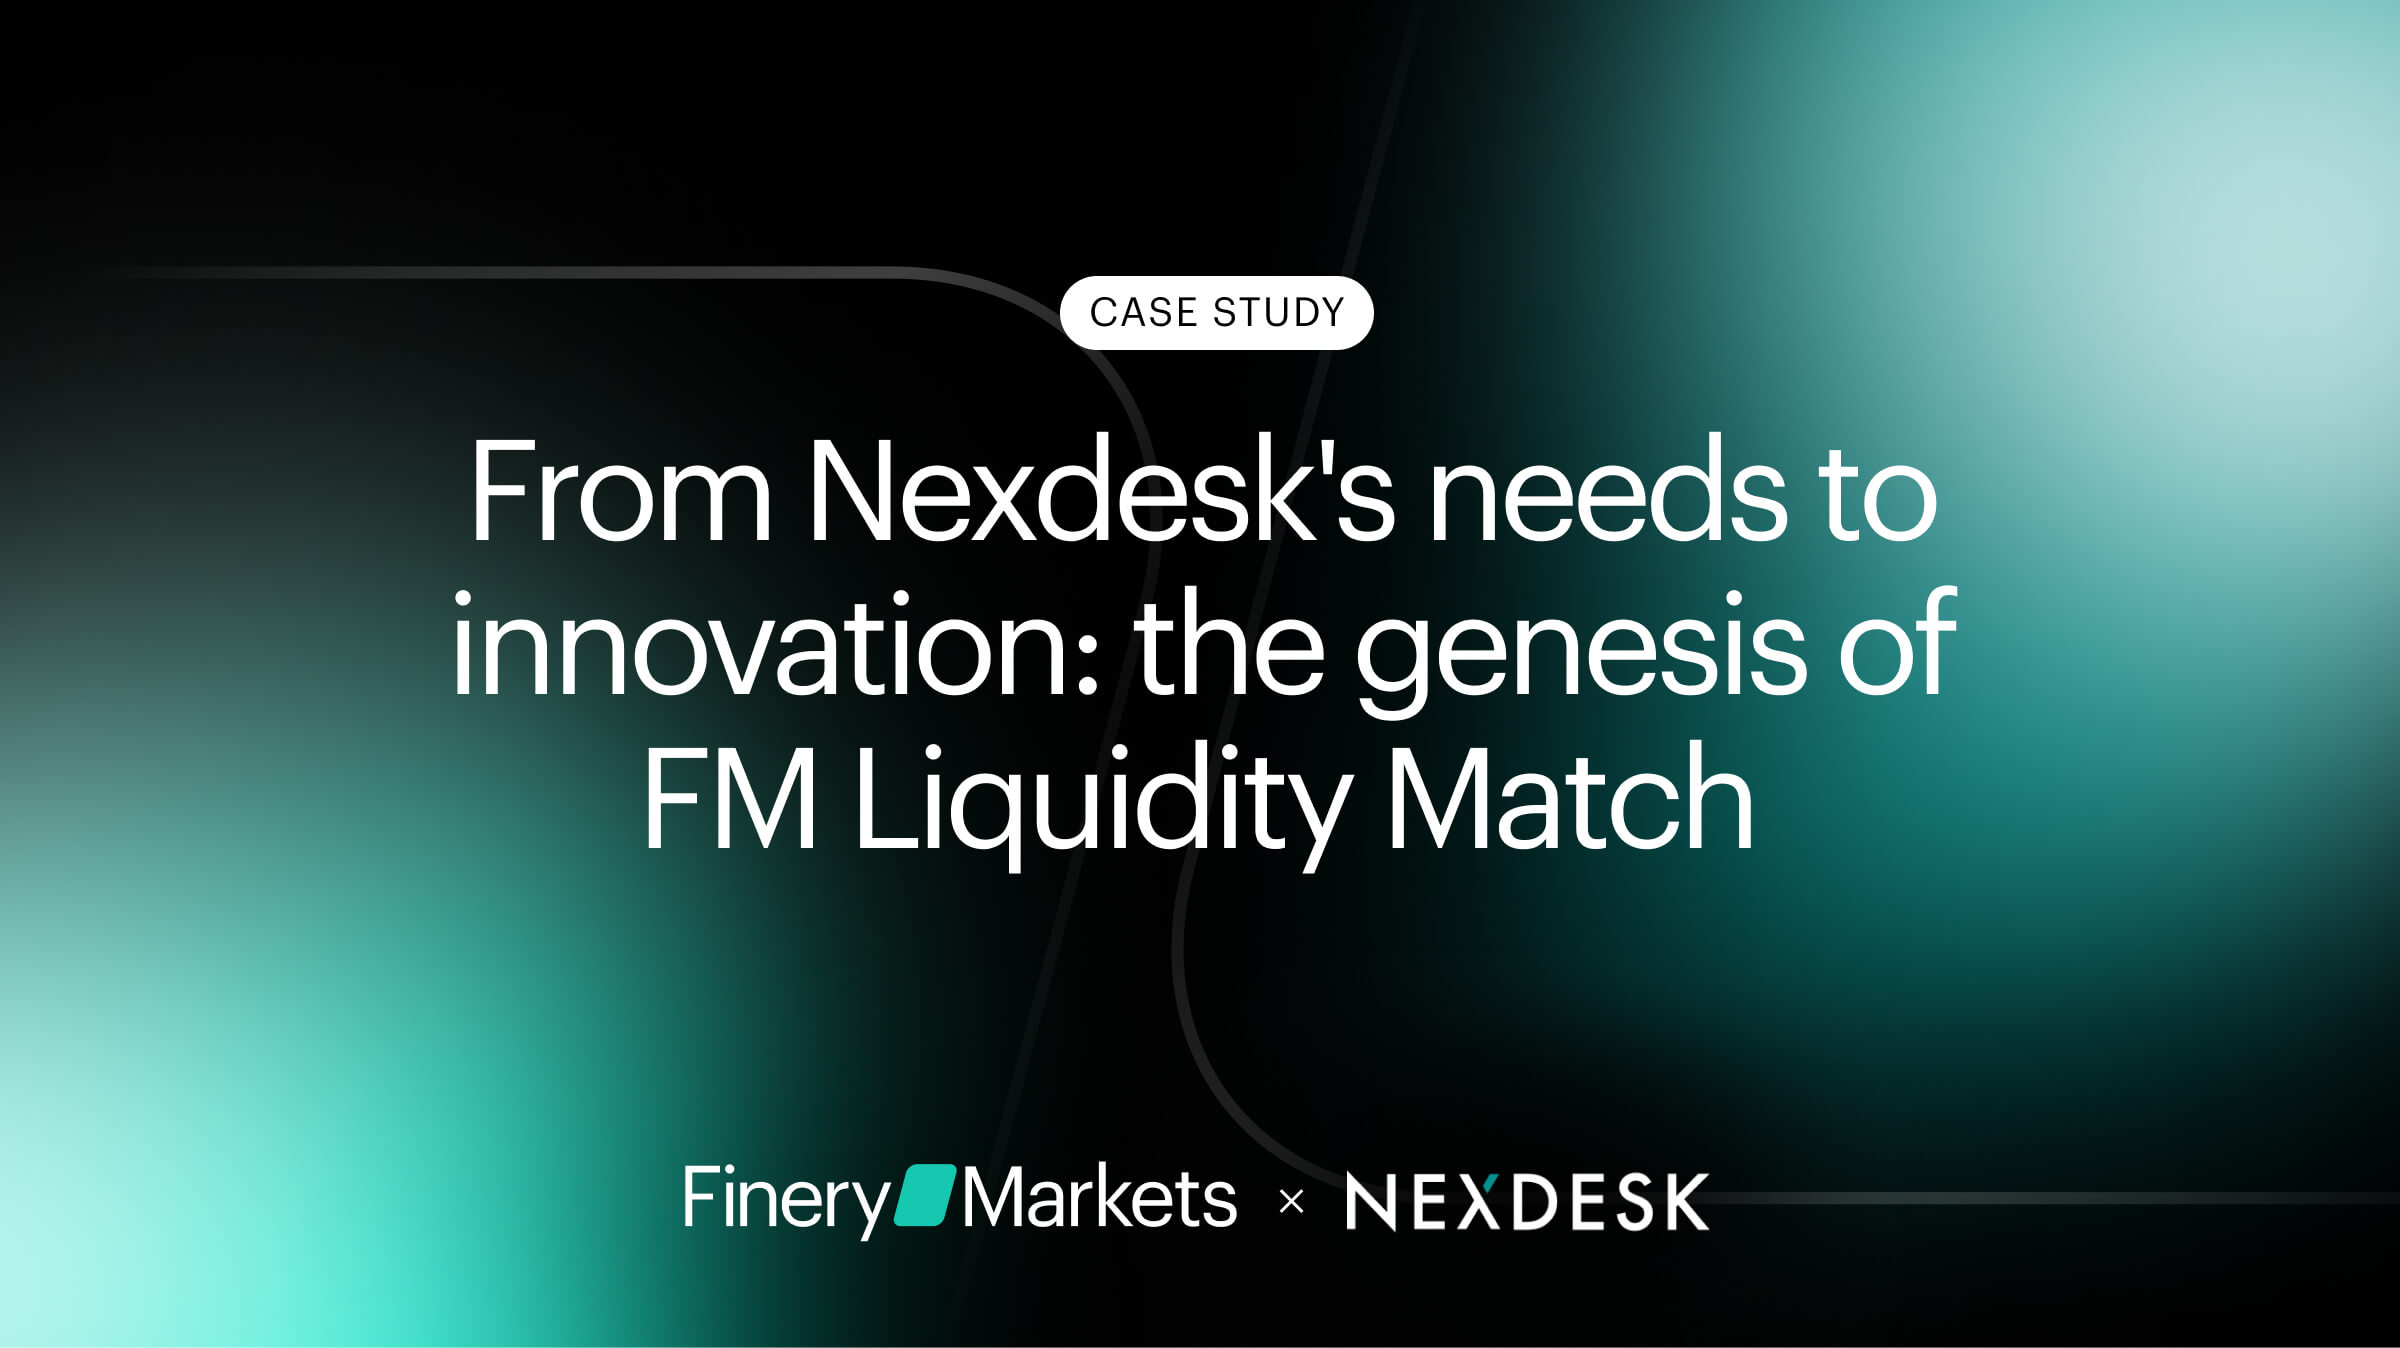 From Nexdesk's needs to innovation: the genesis of FM Liquidity Match